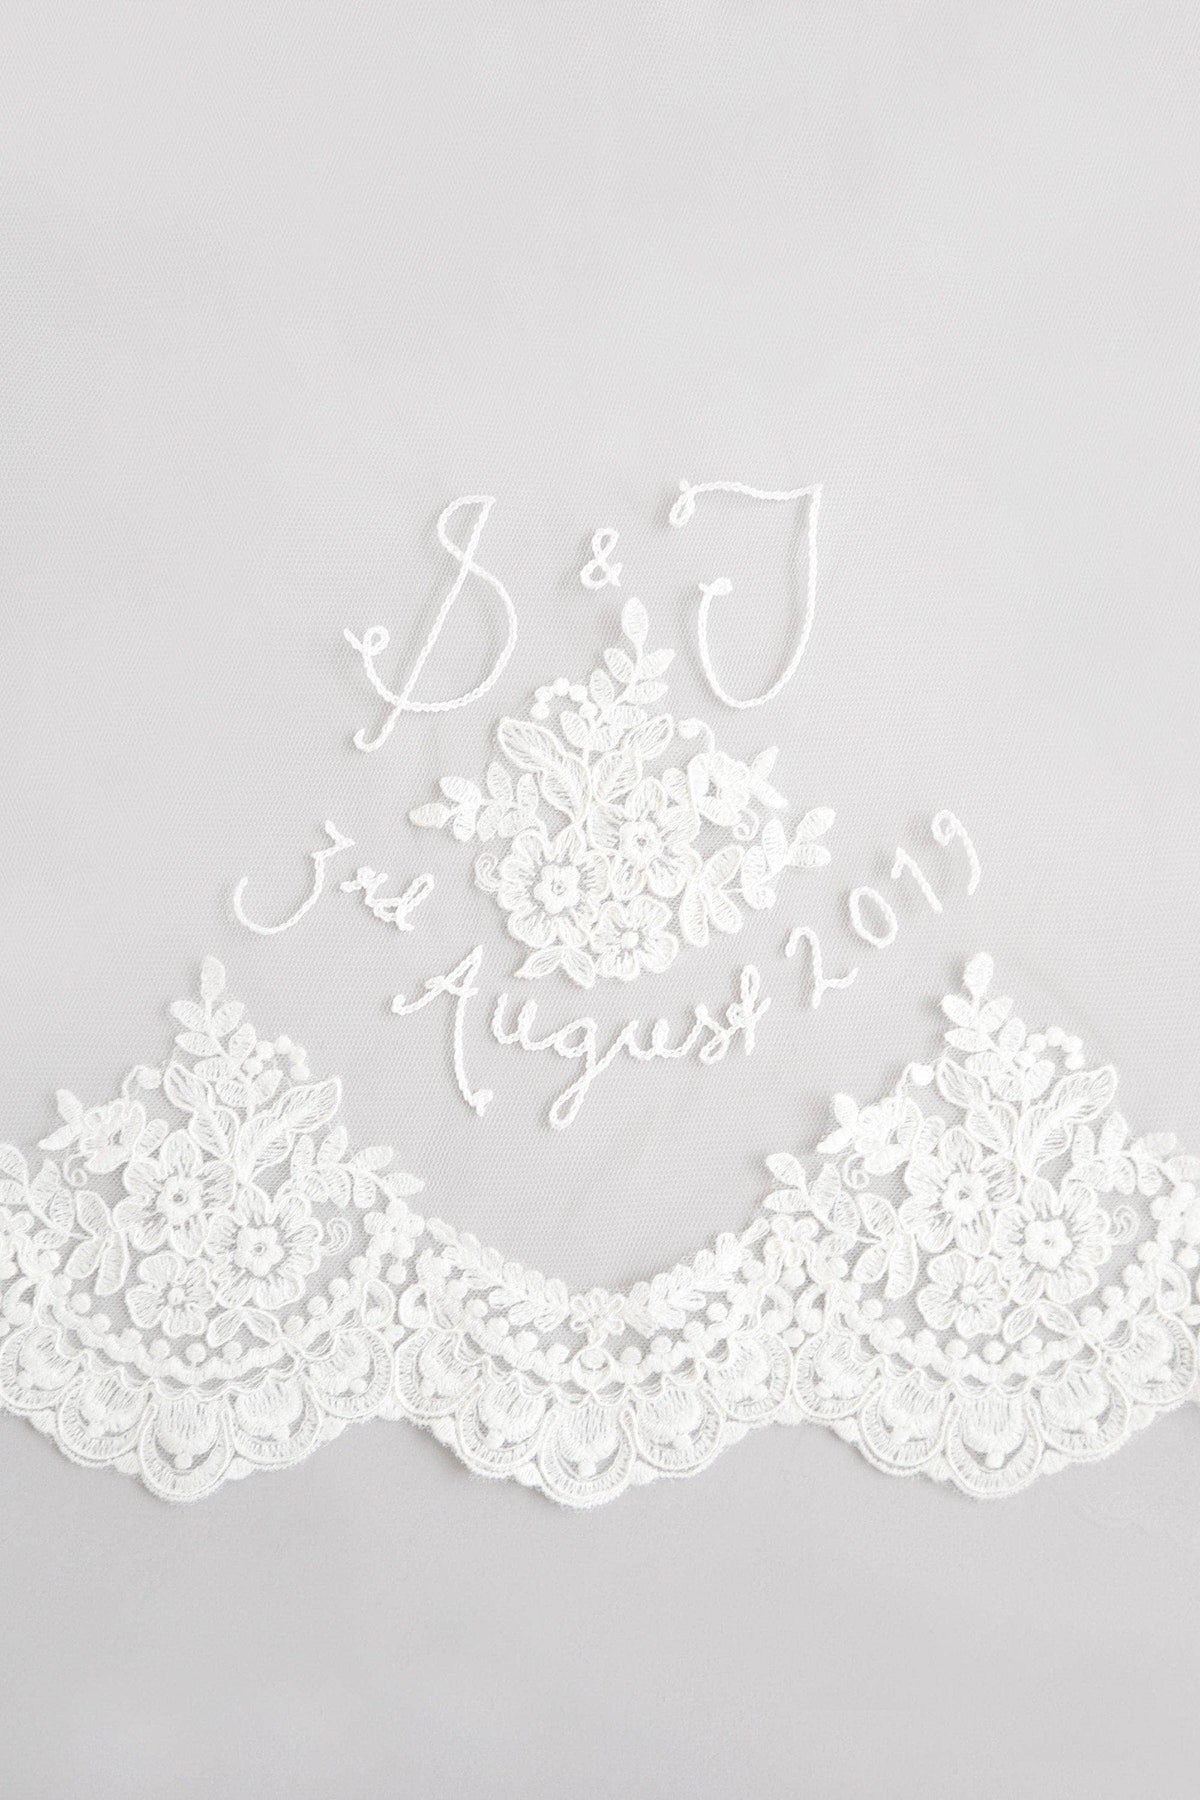 Wedding Veil Embroidery Add Personalised Embroidery to your Veil